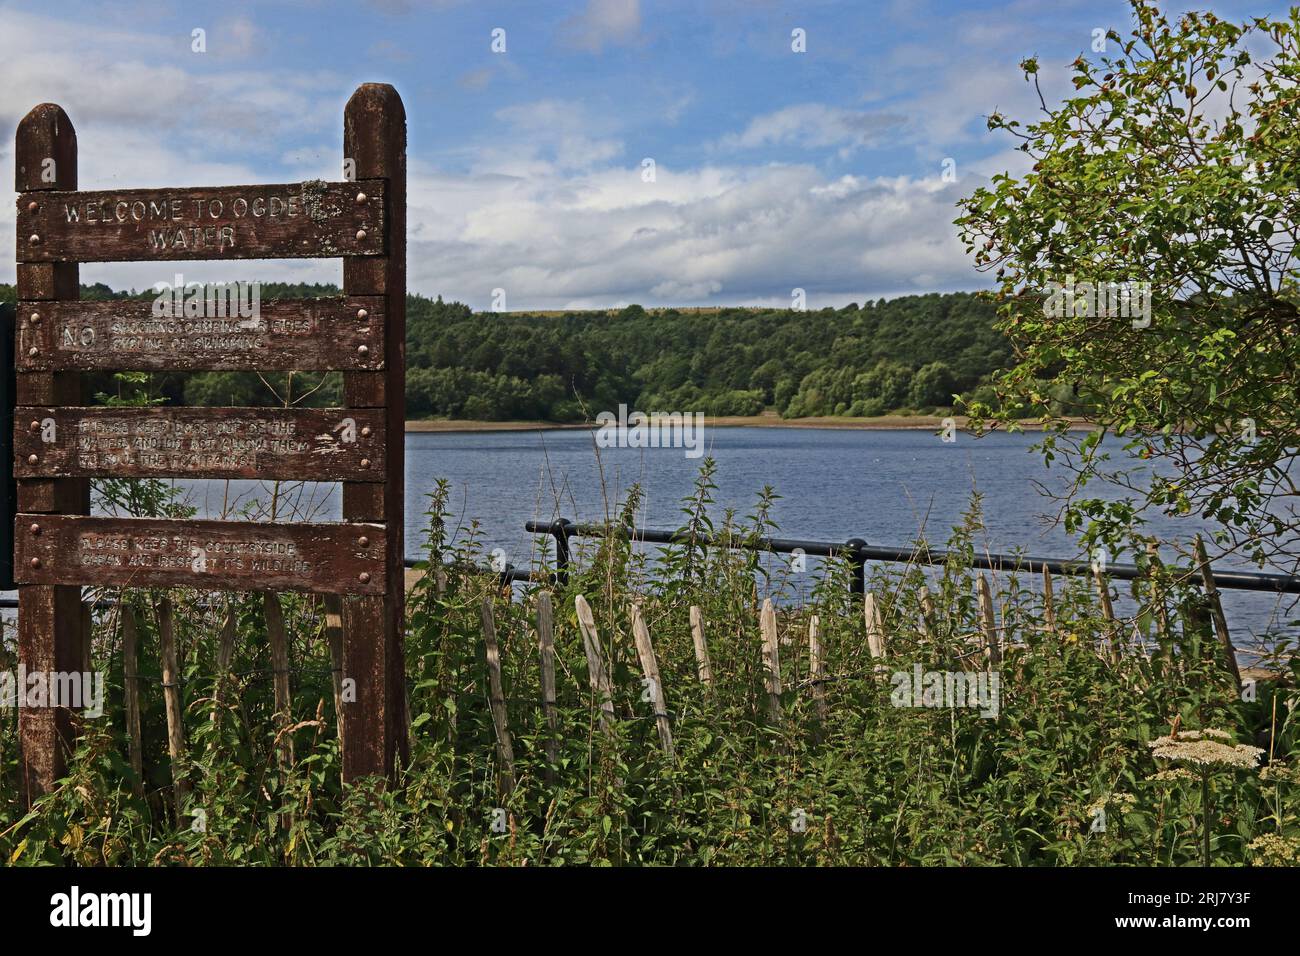 Wooden sign at Ogden Water, a reservoir on the outskirts of Halifax Stock Photo